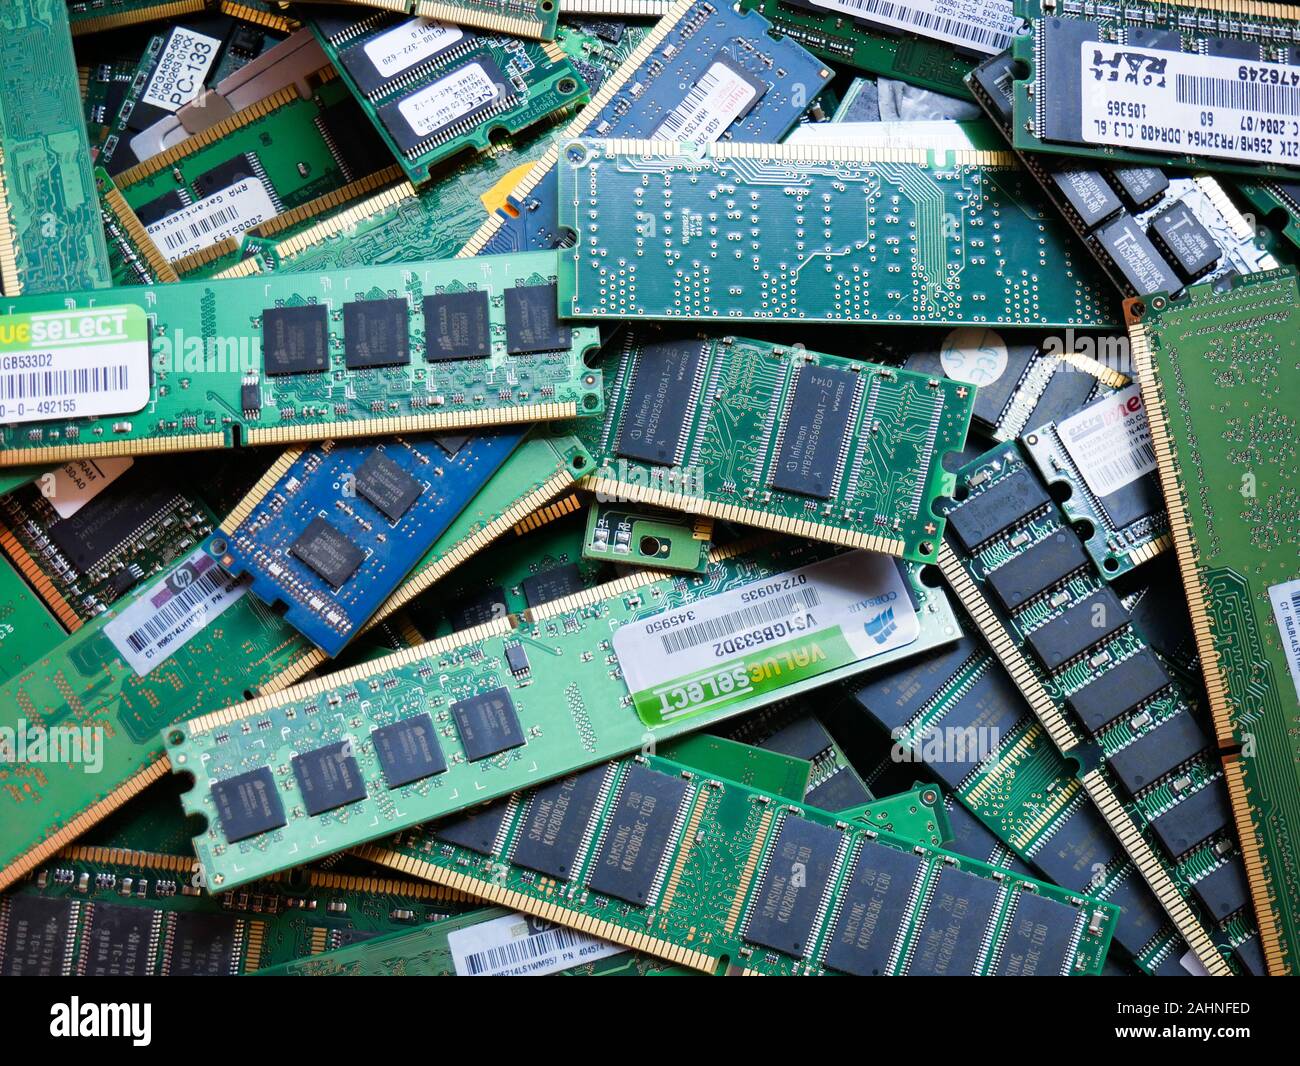 Wien/Austria - june 4 2019: pile of discarded computer memory boards  sorted on a bin  in a recycling and recovery compound in vienna Stock Photo